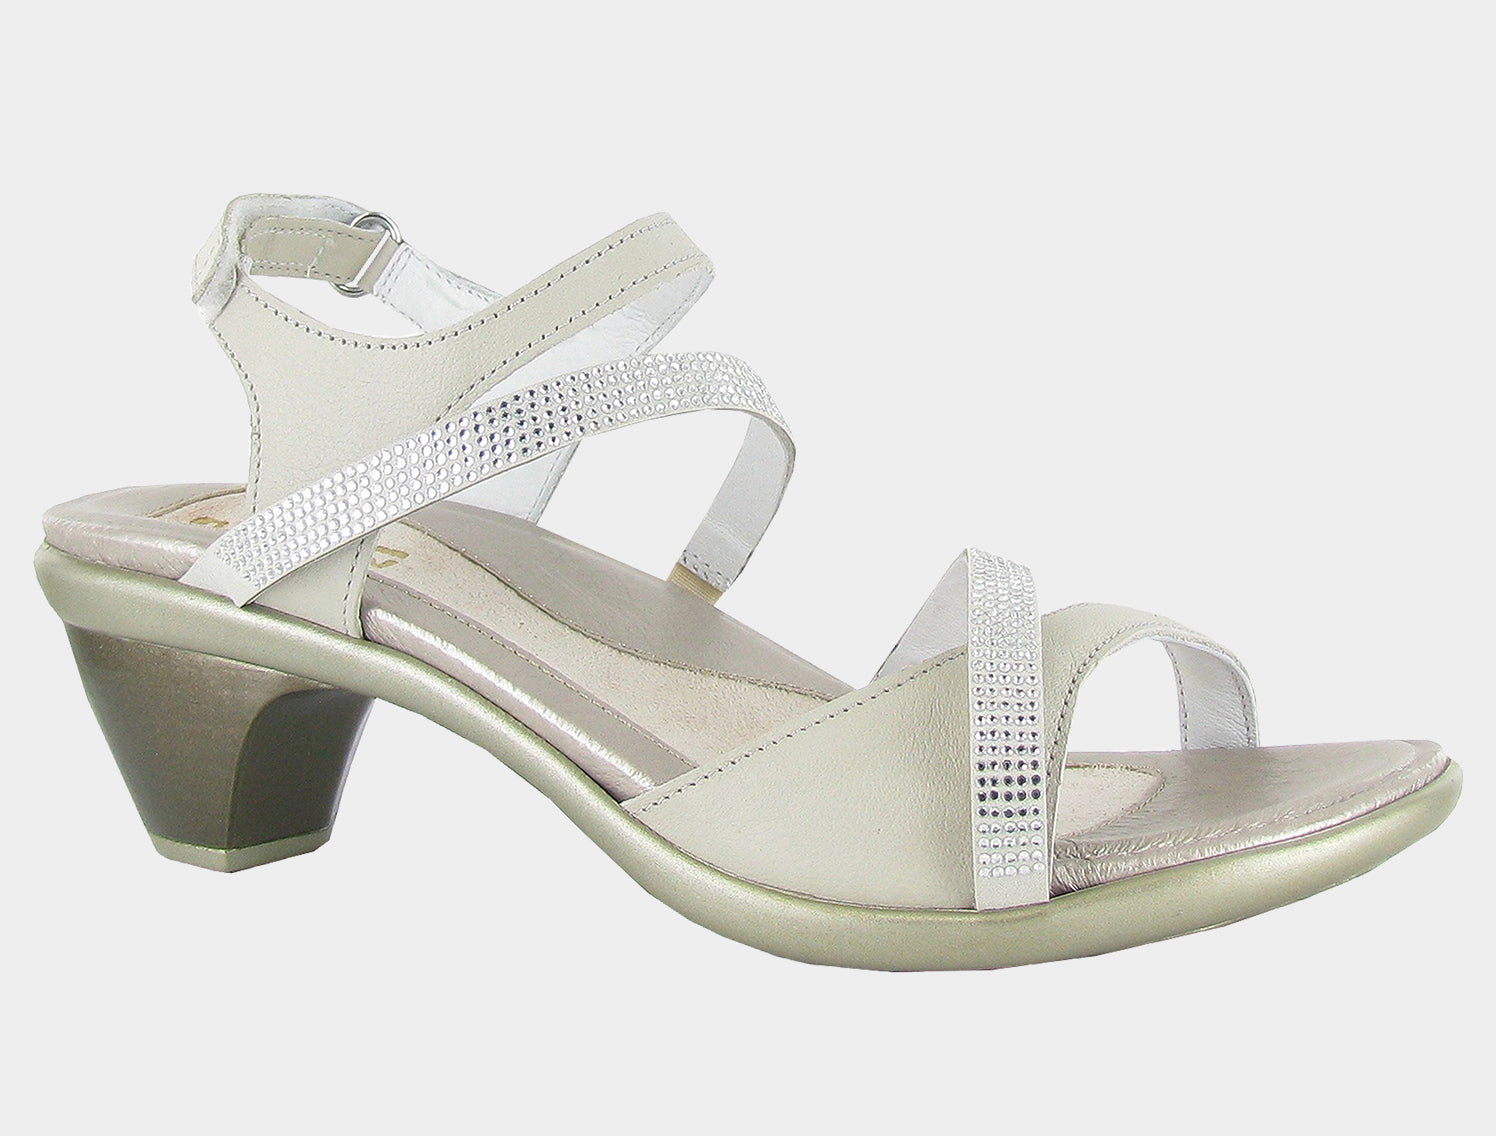 NAOT Innovate Sandal - Soft Ivory/Clear Stones